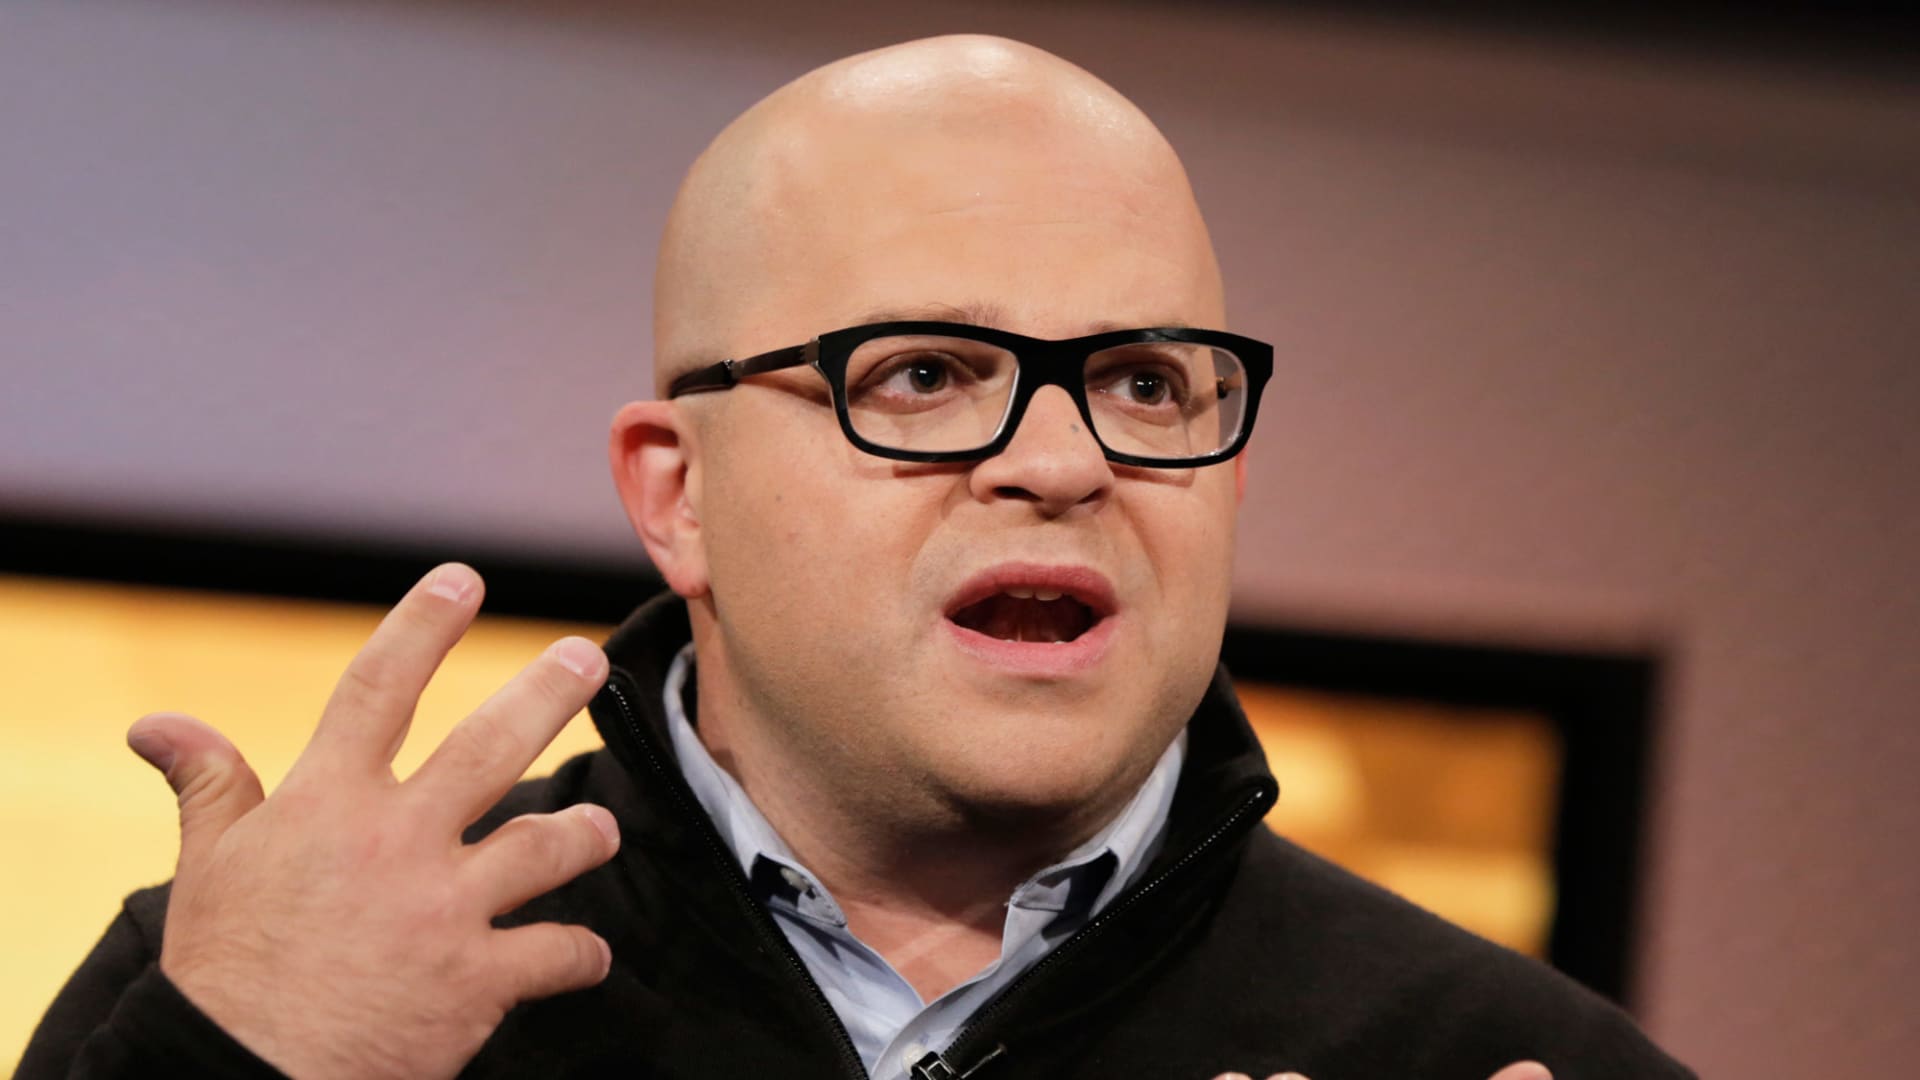 SEC charges Twilio engineers with insider trading